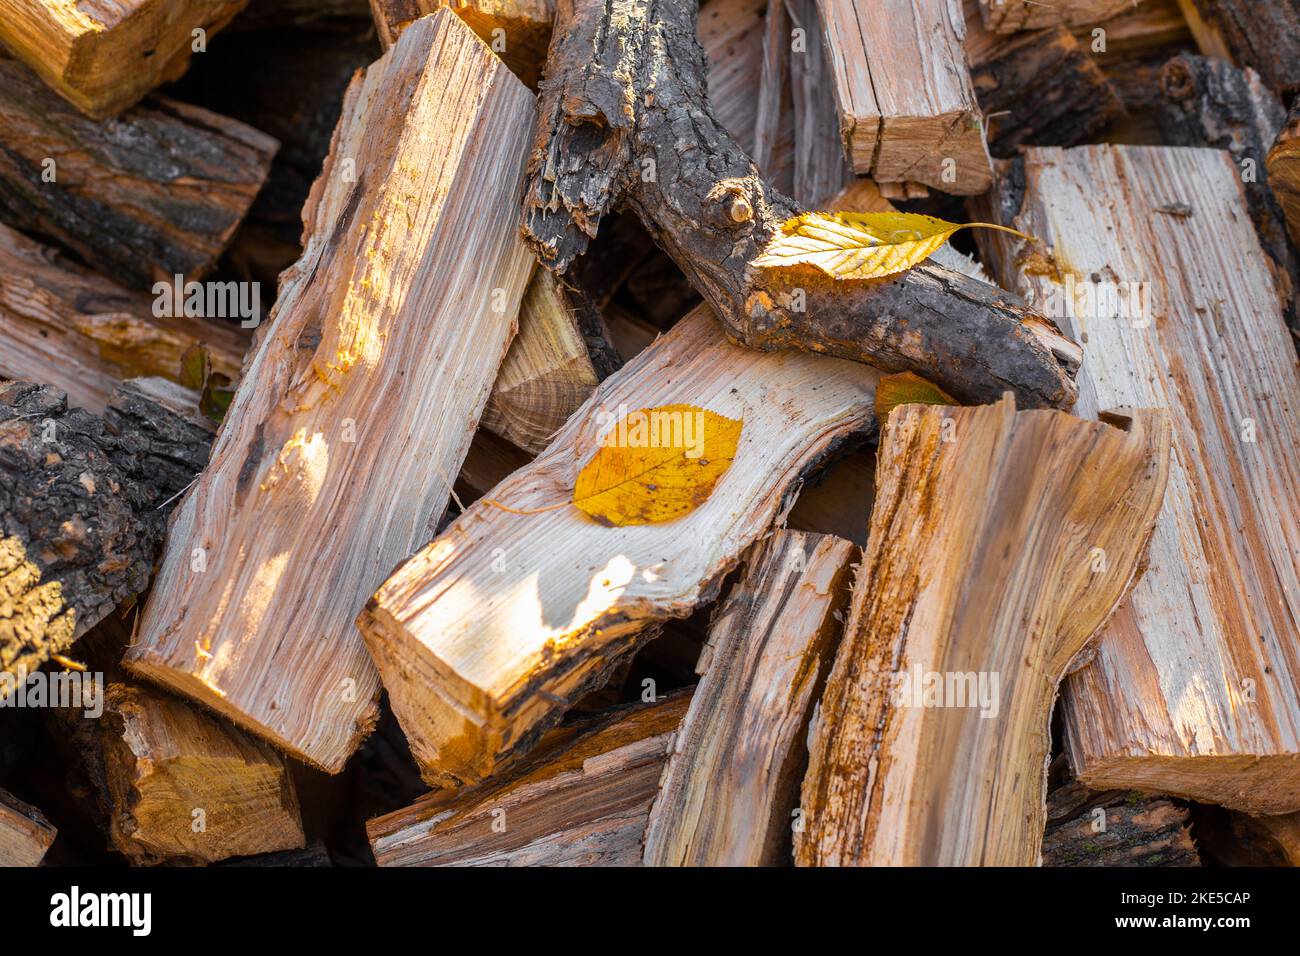 Pile of firewood with yellow fallen leaves in autumn. Preparation of firewood for heating in winter. Stock Photo